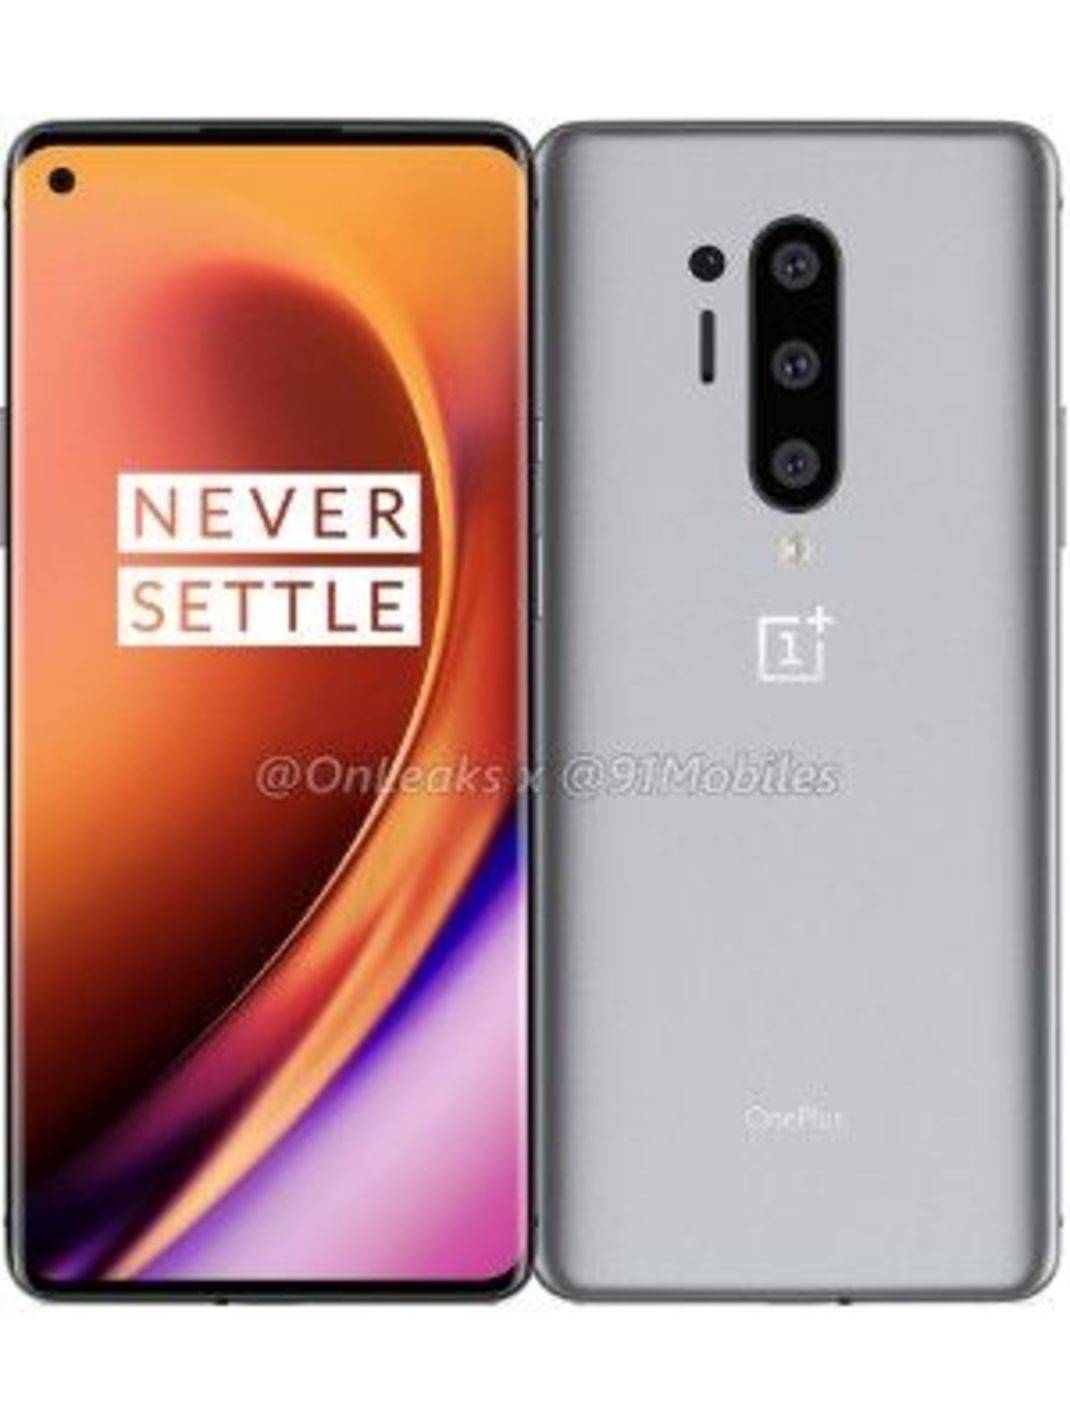 Compare Oneplus 8 Pro Vs Samsung Galaxy S Ultra 5g Price Specs Review Gadgets Now